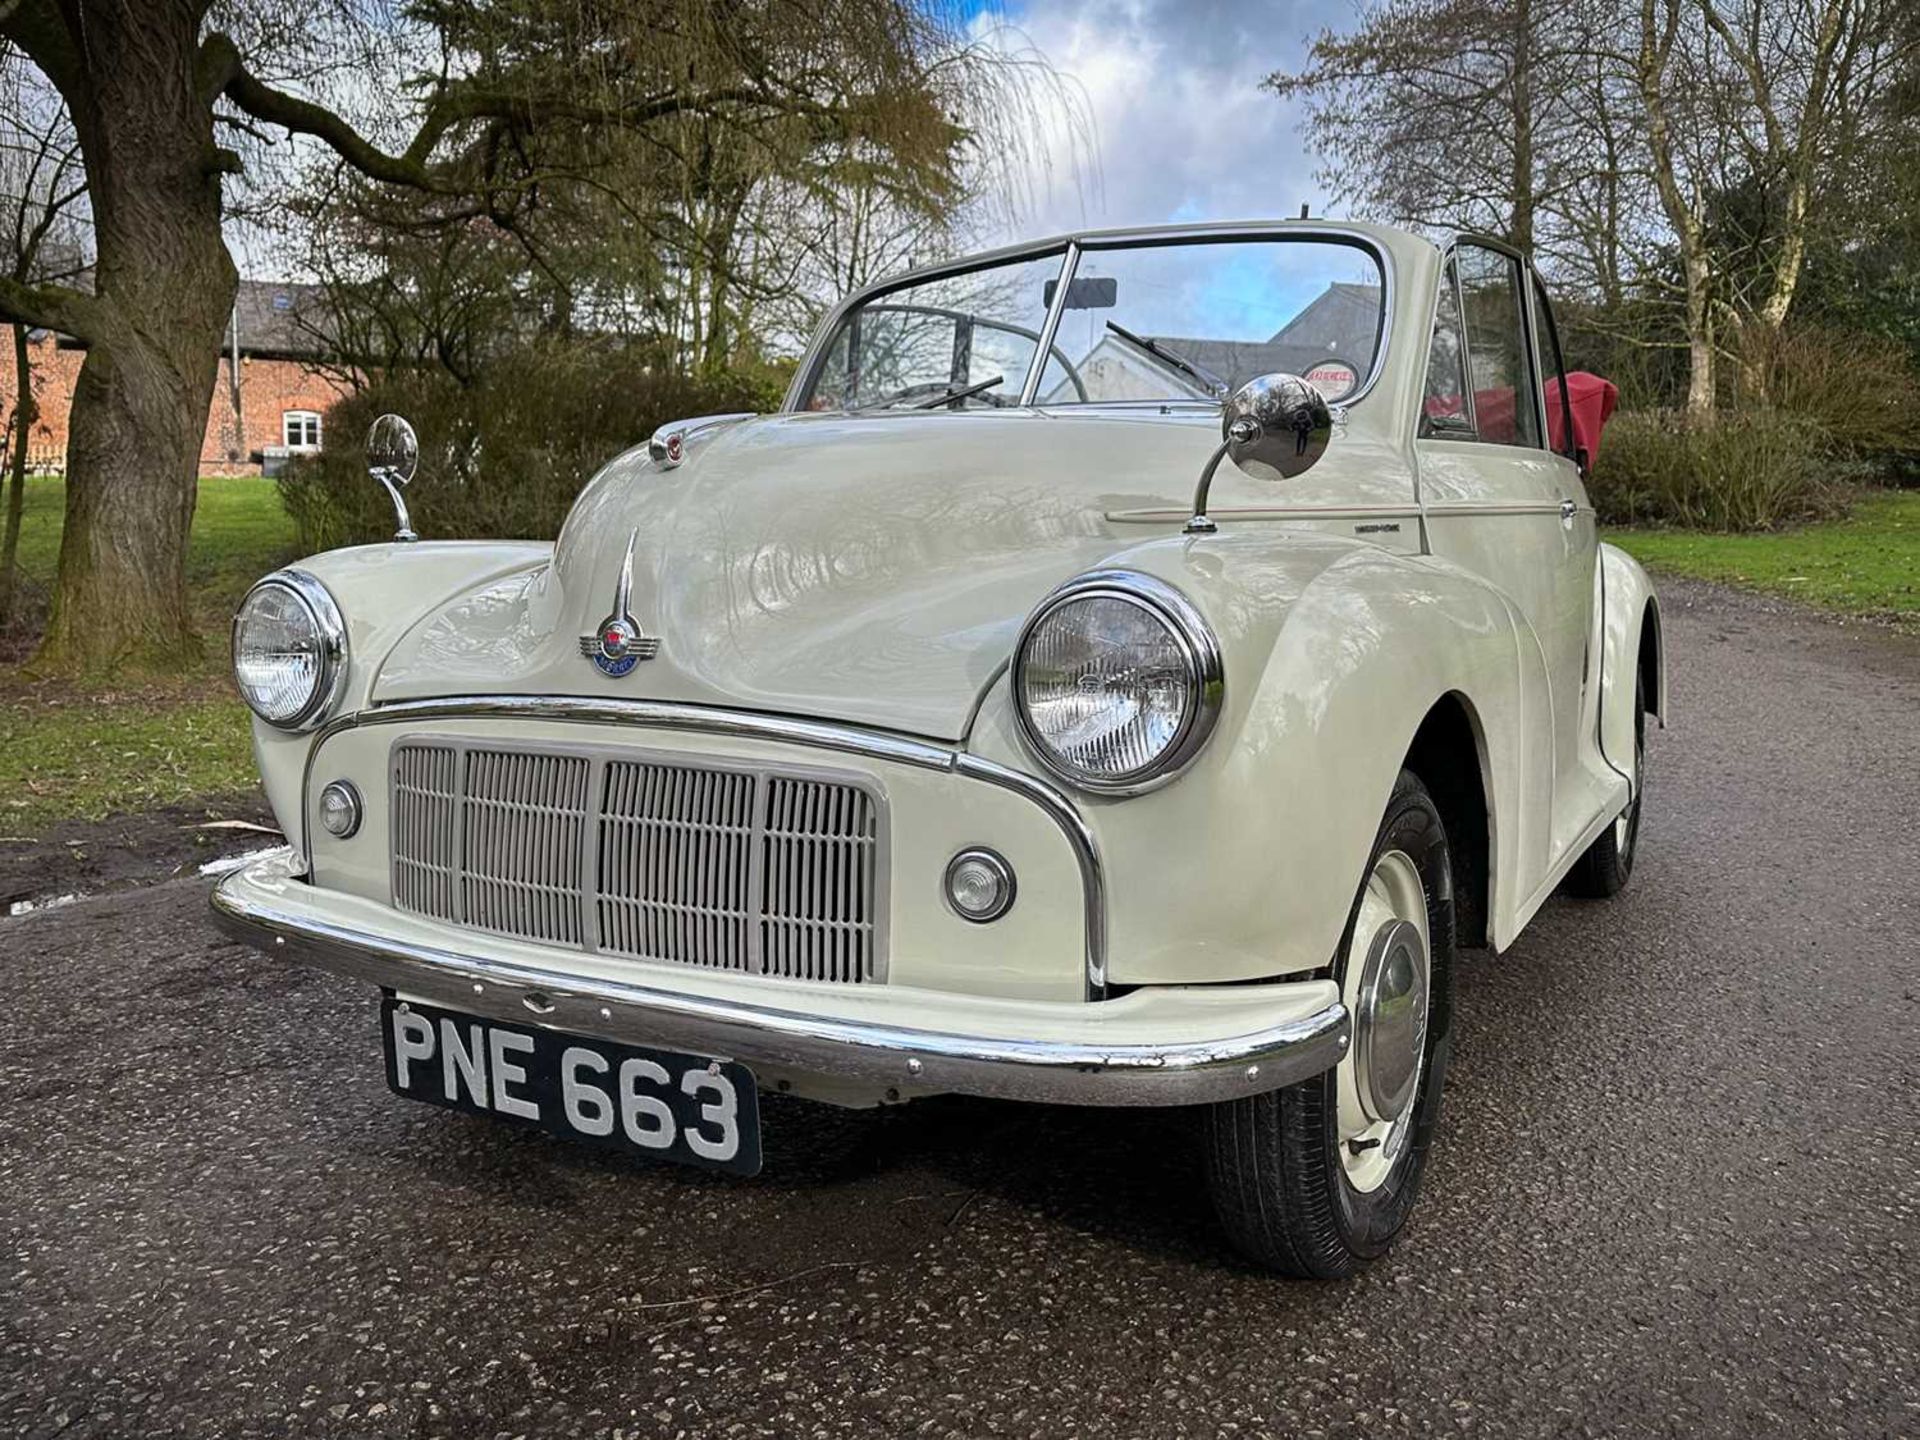 1954 Morris Minor Tourer Fully restored to concours standard - Image 3 of 100